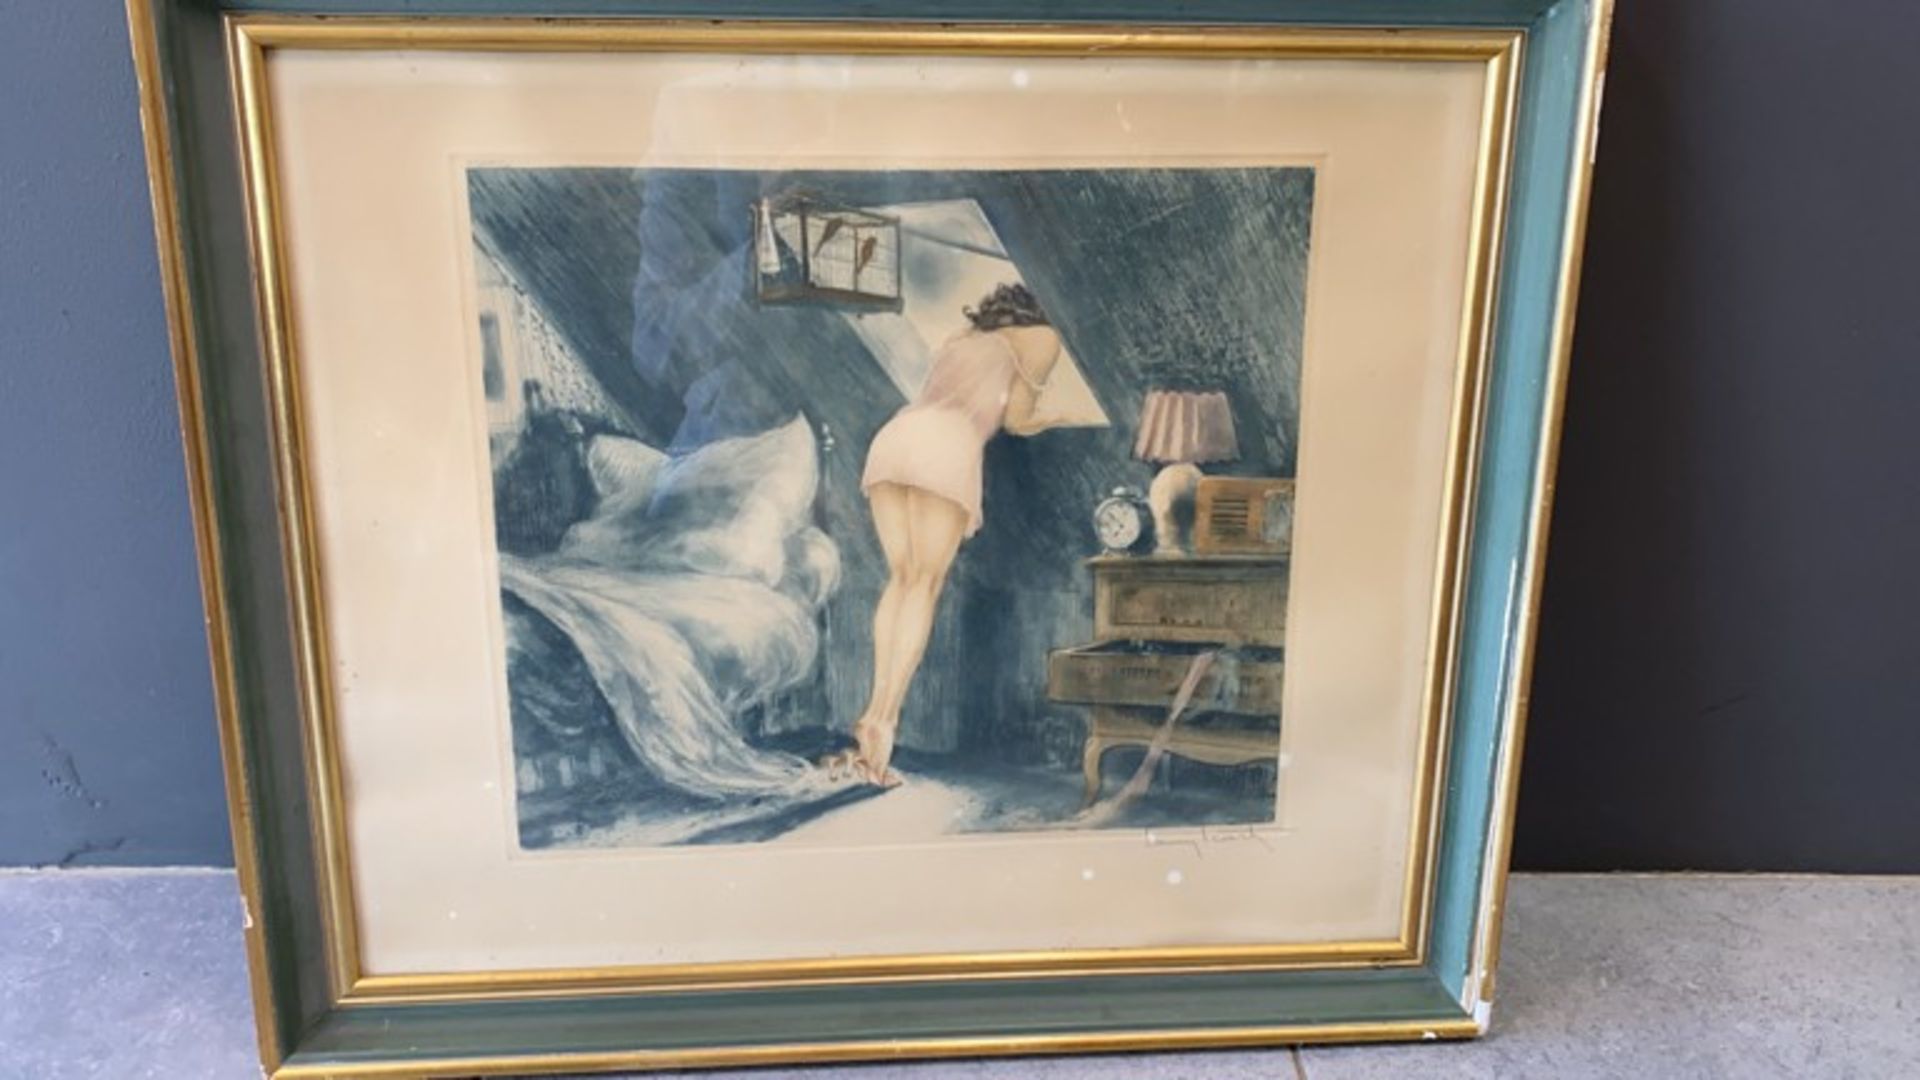 Louis ICART (1888-1950). Color lithograph. "At the window". Signed and Copyrighted in the upper left